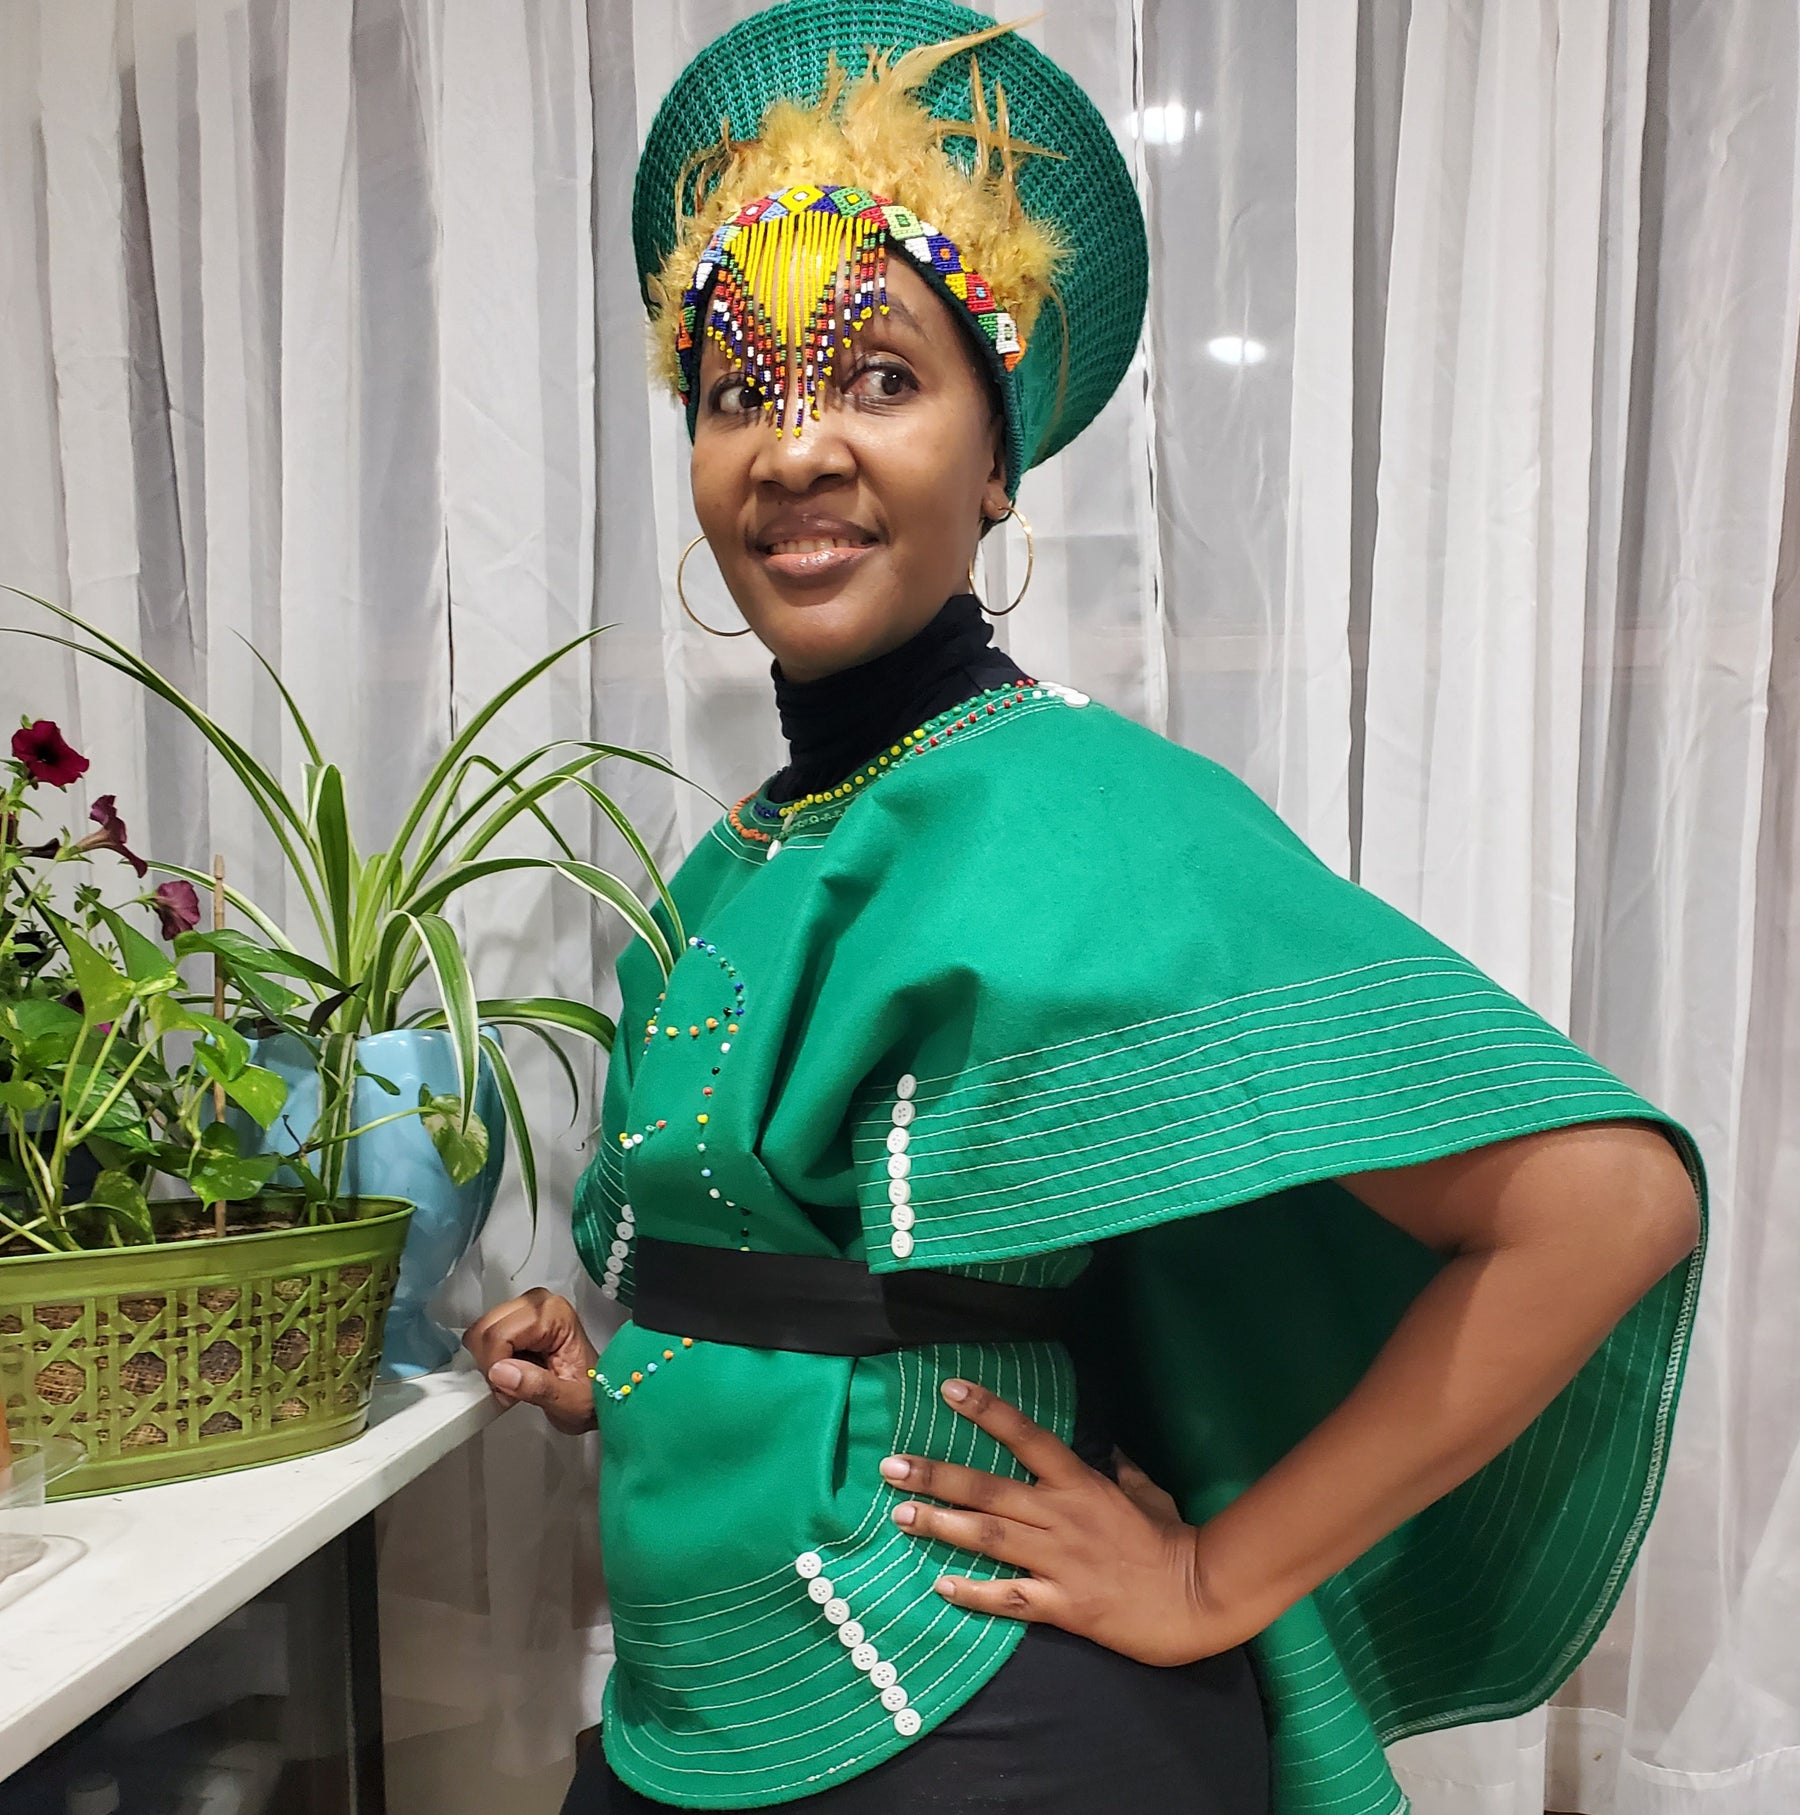 An Ode to All Things Green for Earth Day from Luangisa African Gallery